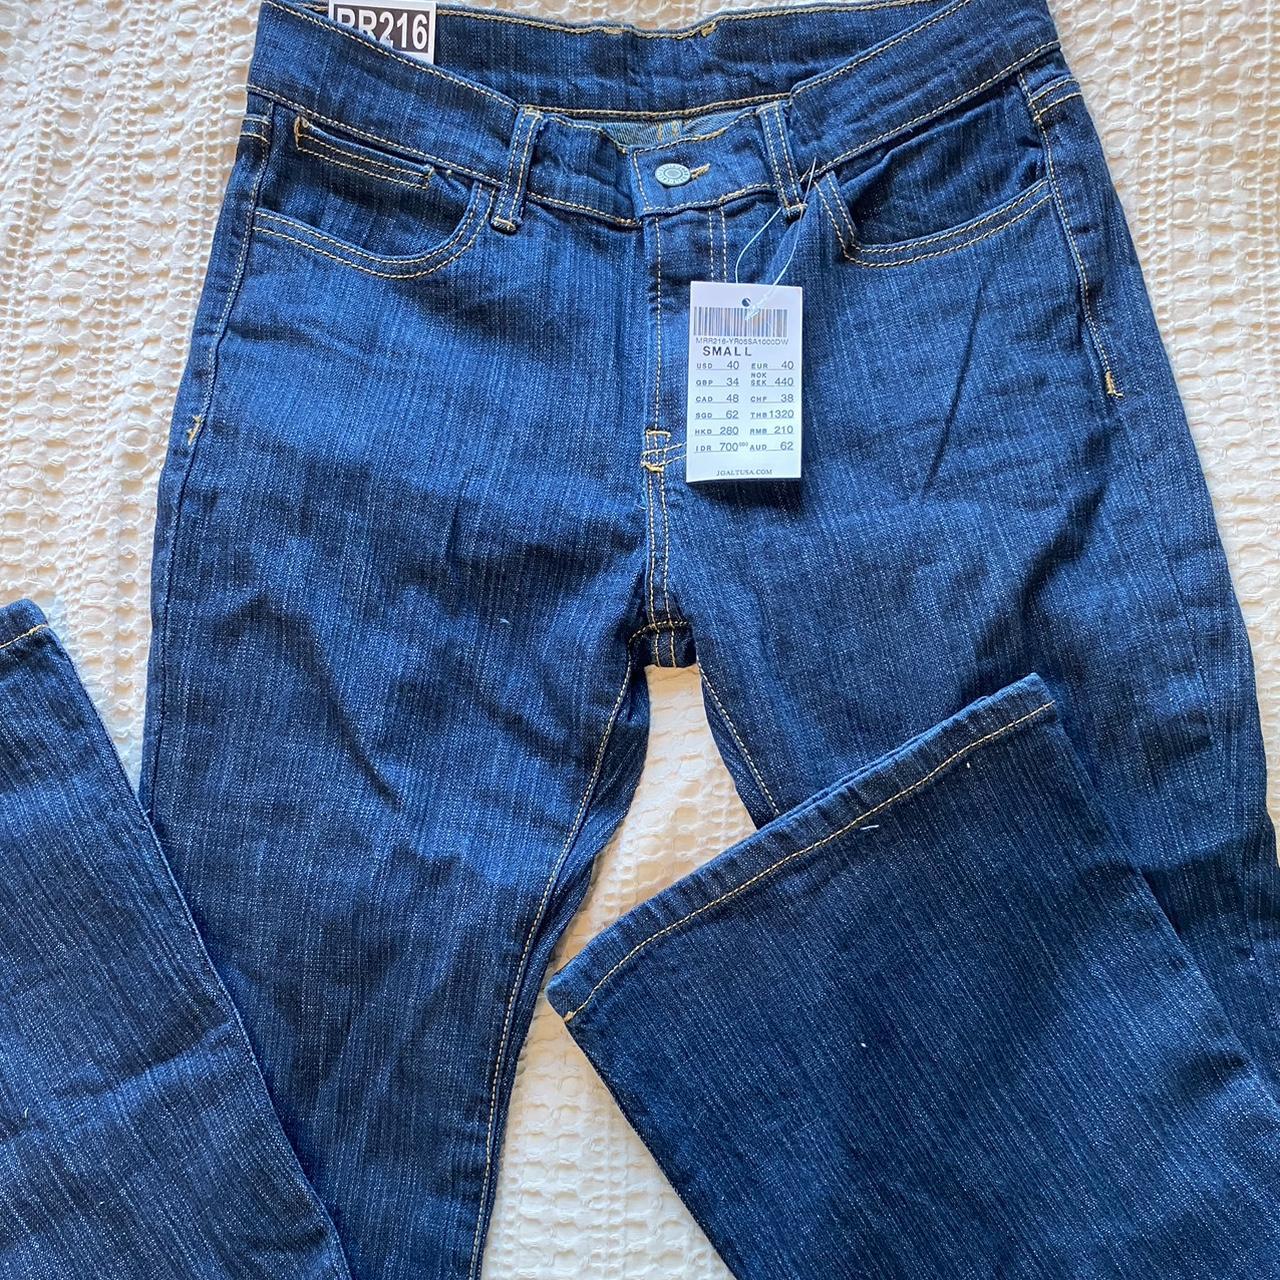 Brandy Melville Melody 90s jeans Brand new with... - Depop